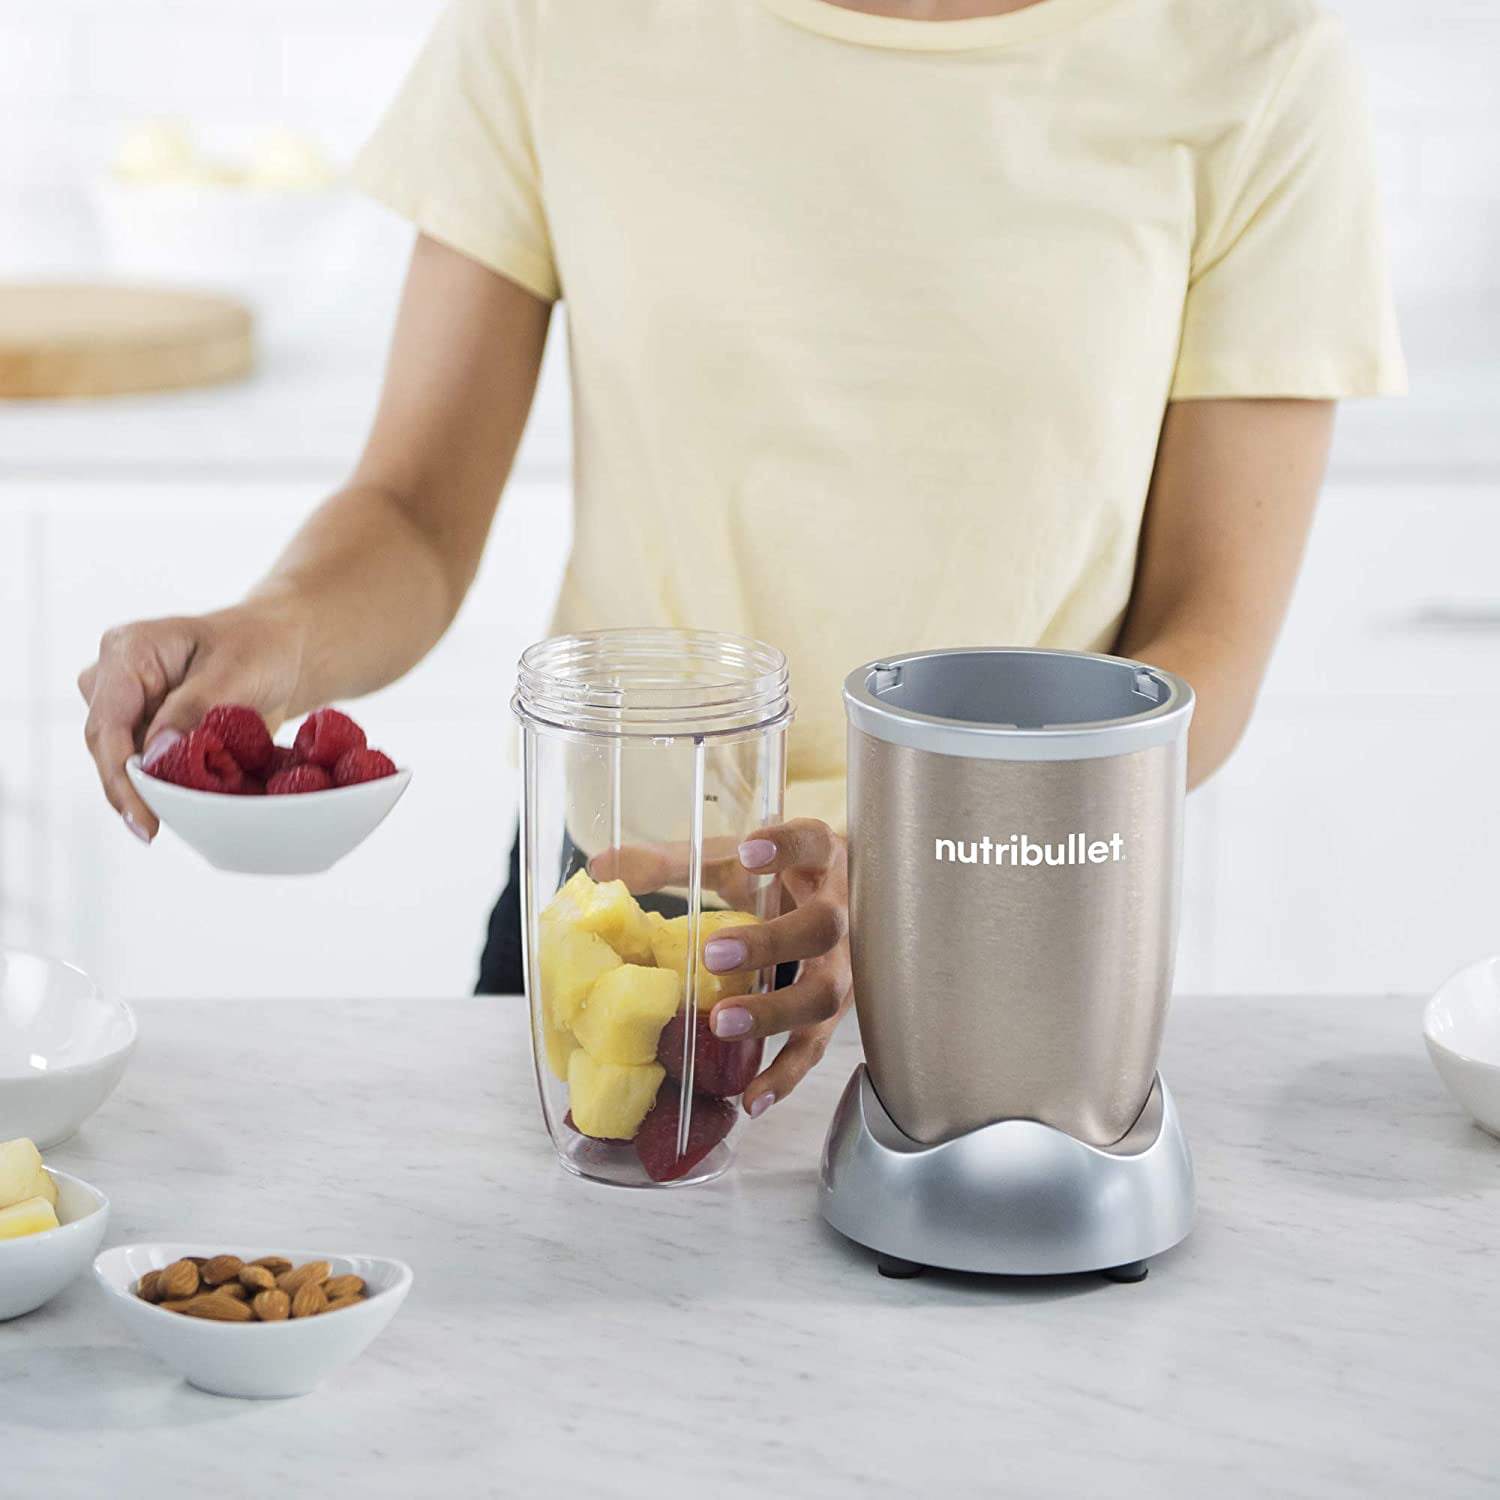 NutriBullet Pro - 13-Piece High-Speed Blender/Mixer System with